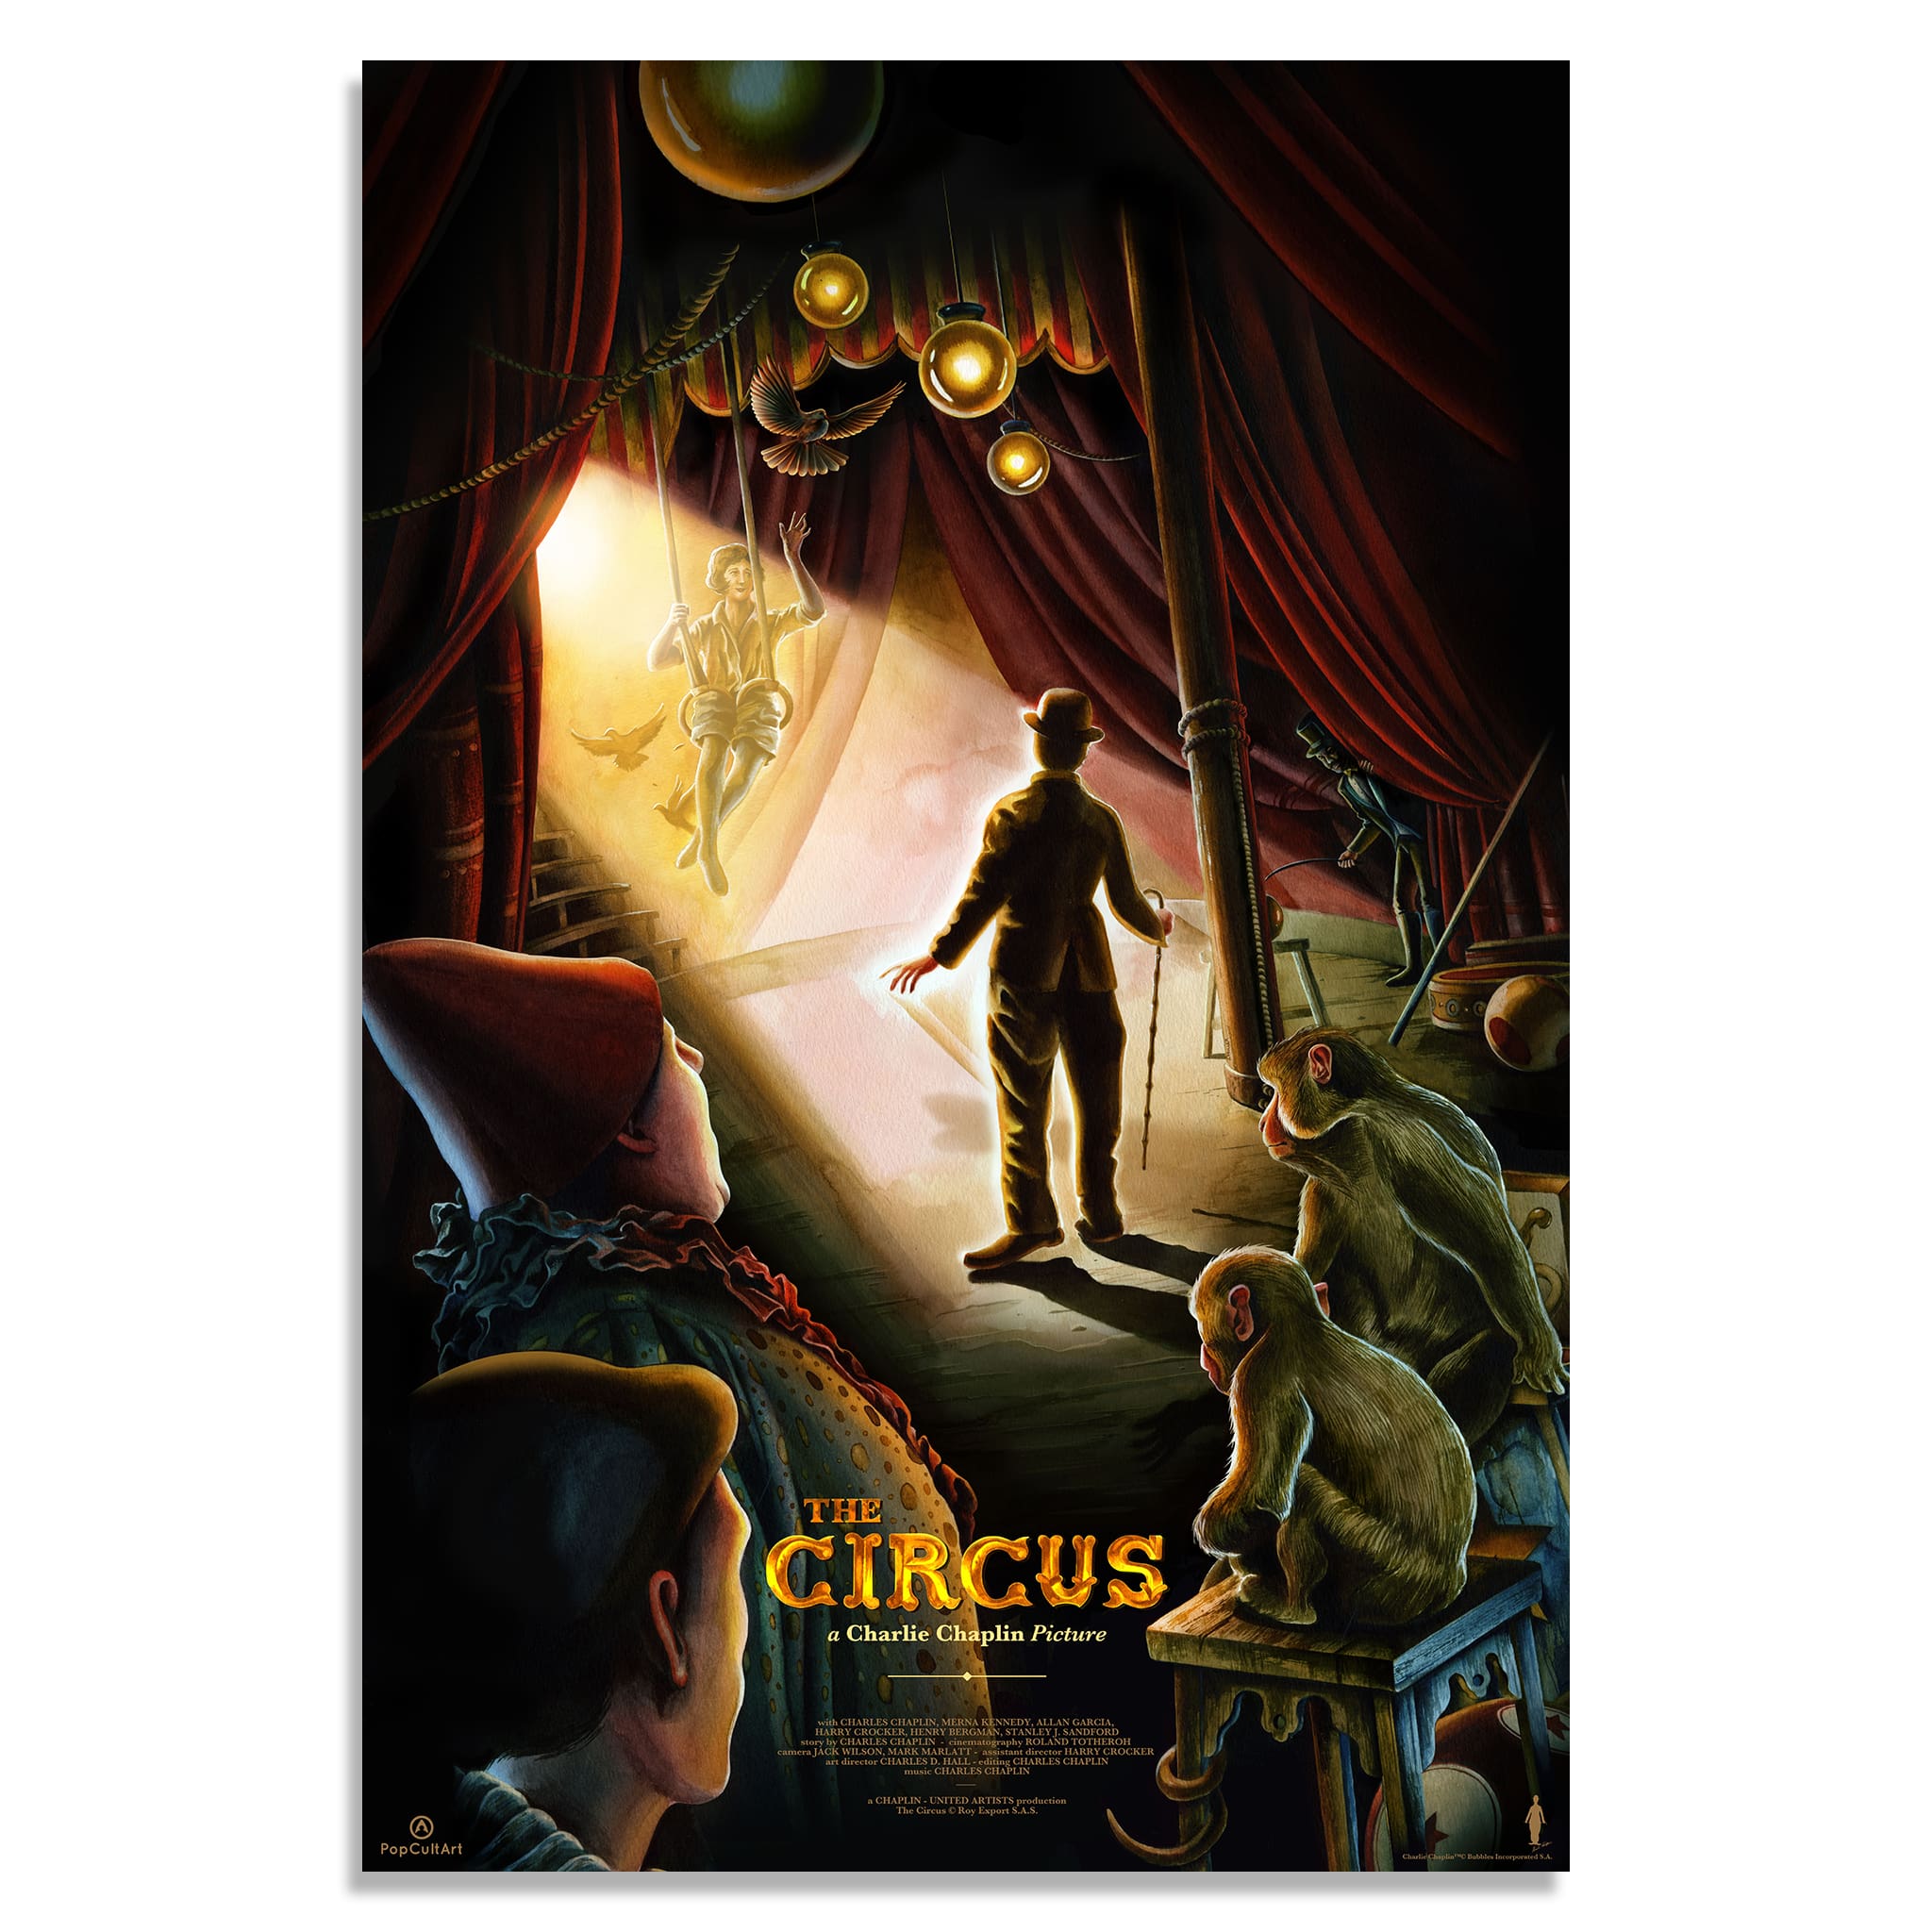 The Circus | Jeremy Pailler | Giclee |  PopCultArt.